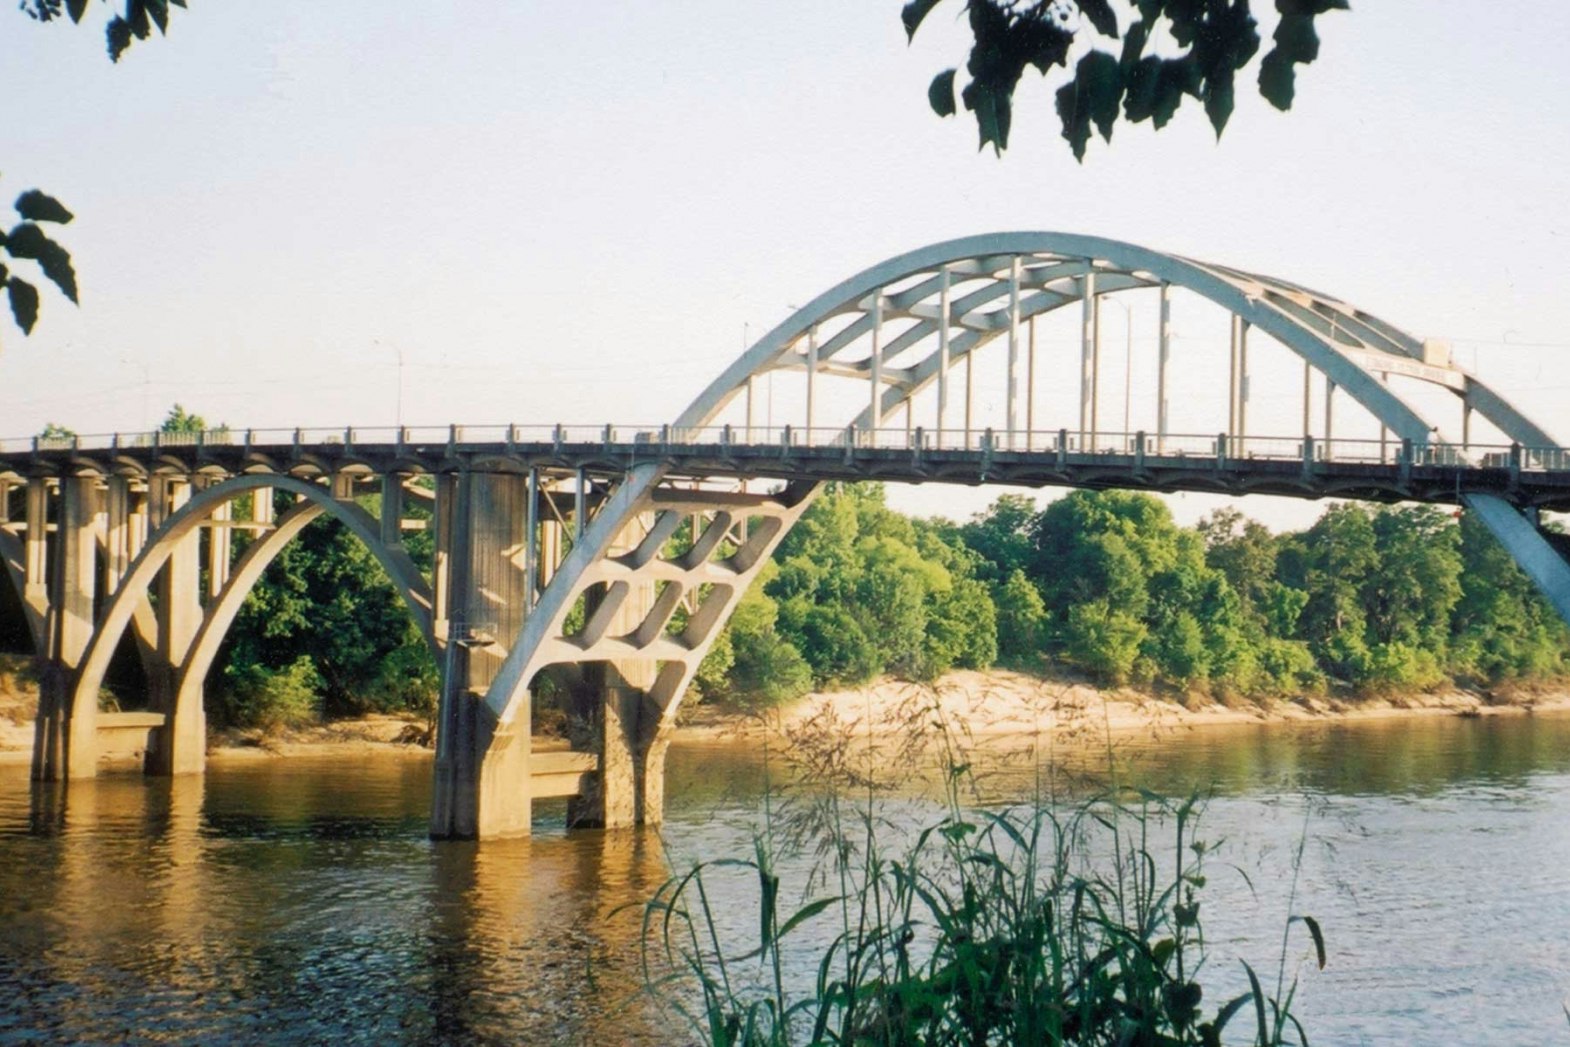 An arched steel bridge over a river